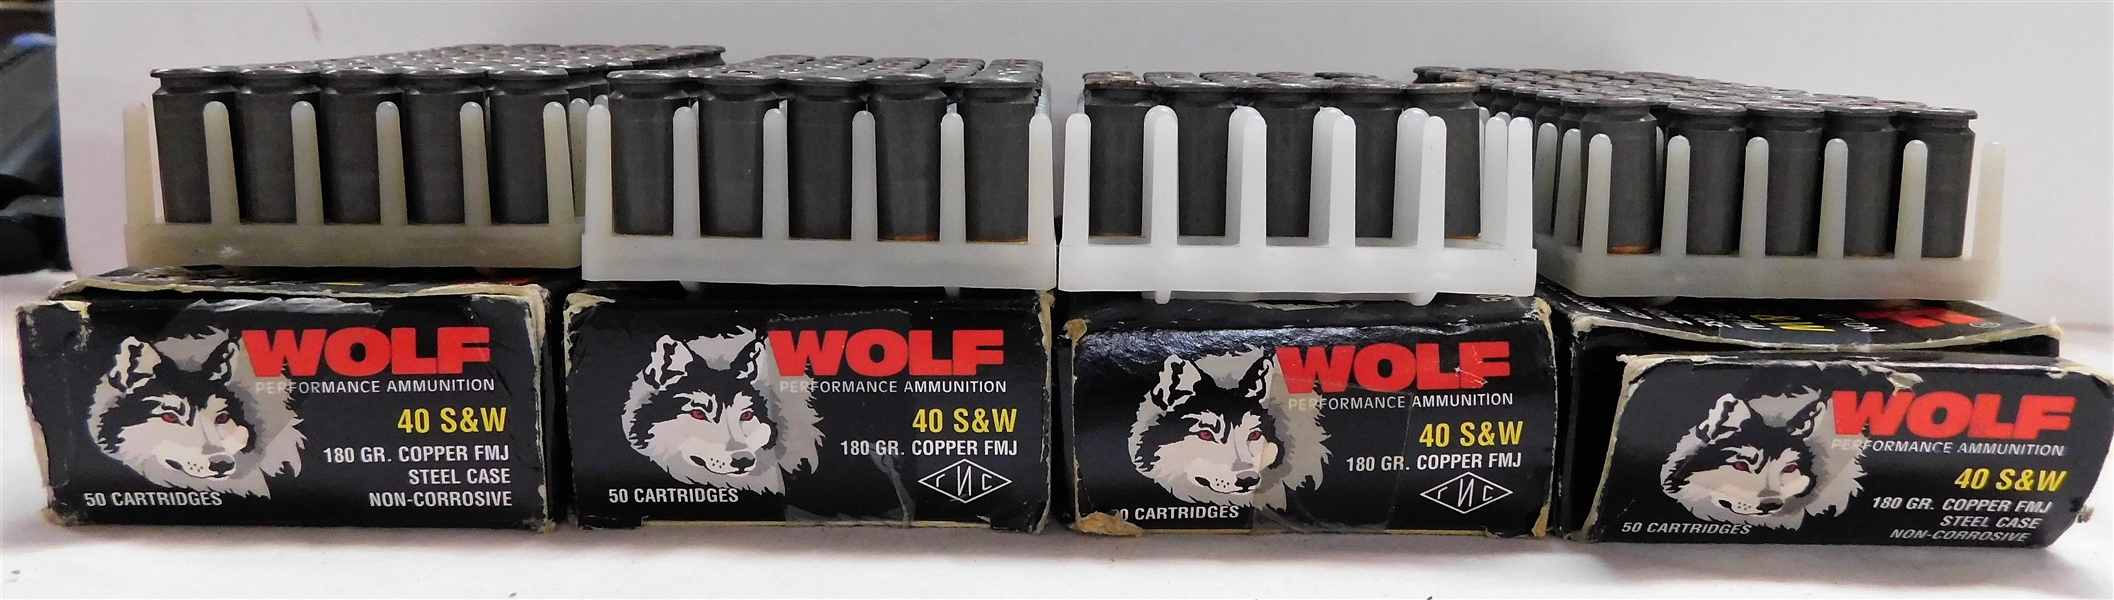 195 Rounds of .40 S&W Wolf Bullets  